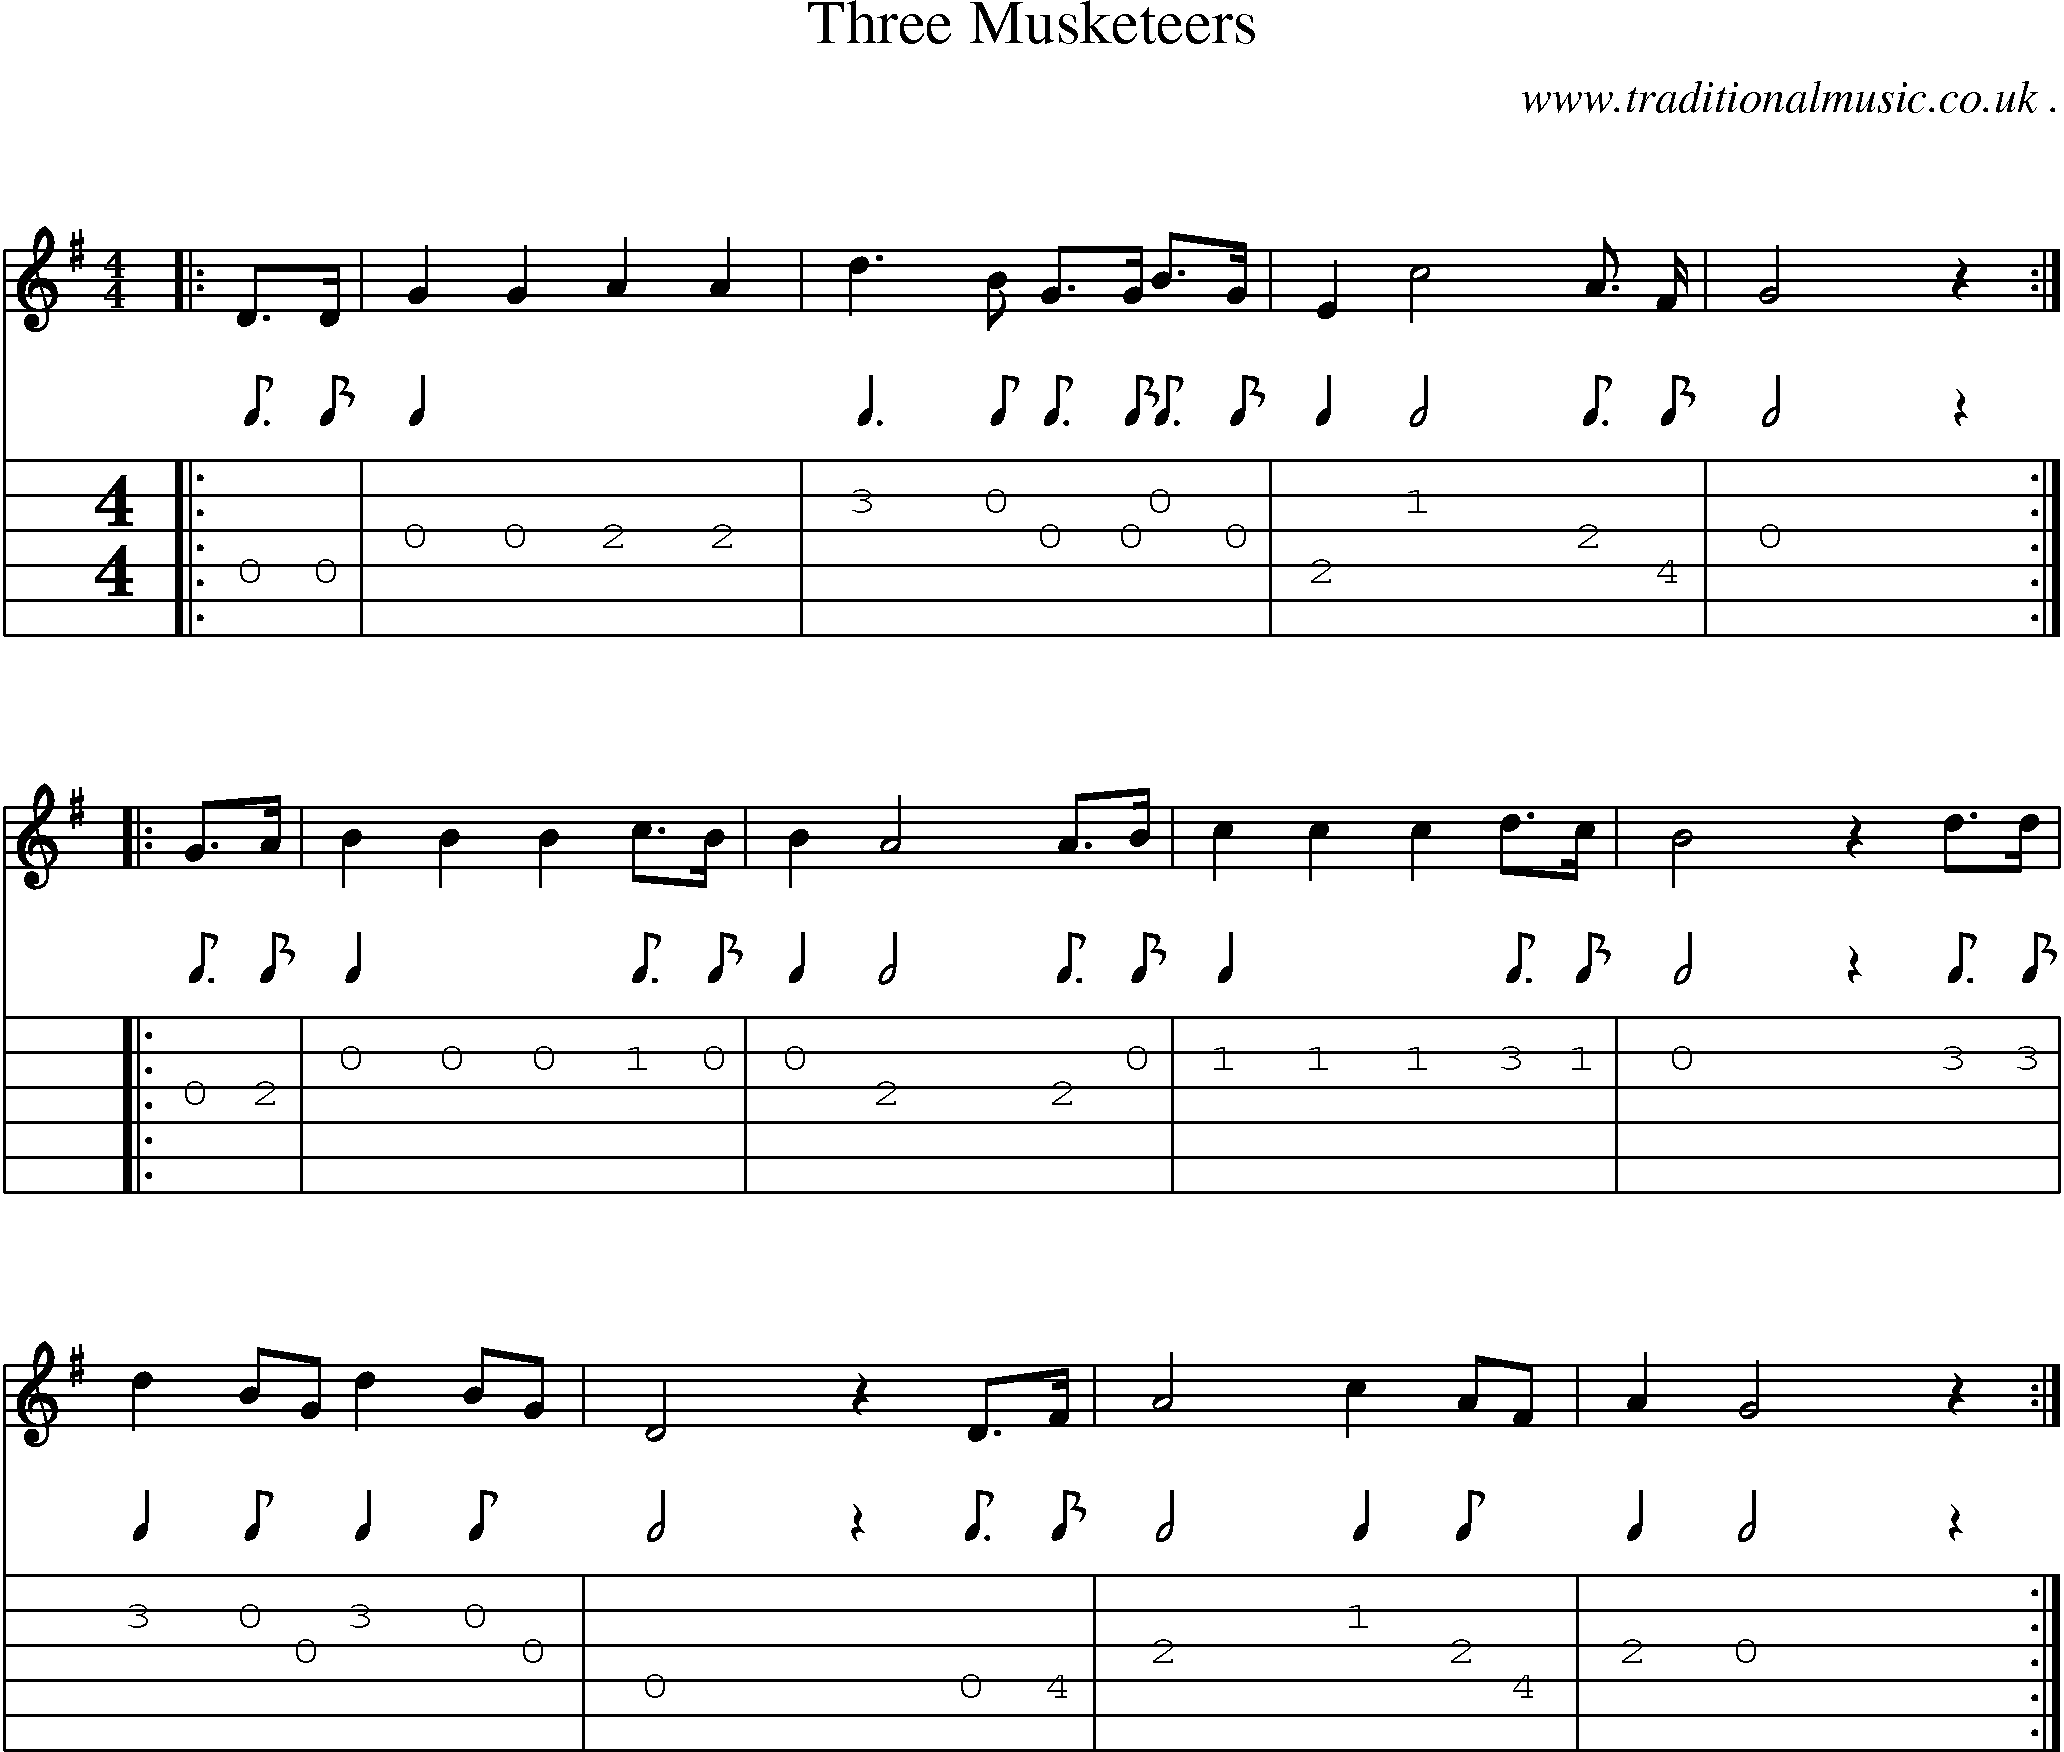 Sheet-Music and Guitar Tabs for Three Musketeers